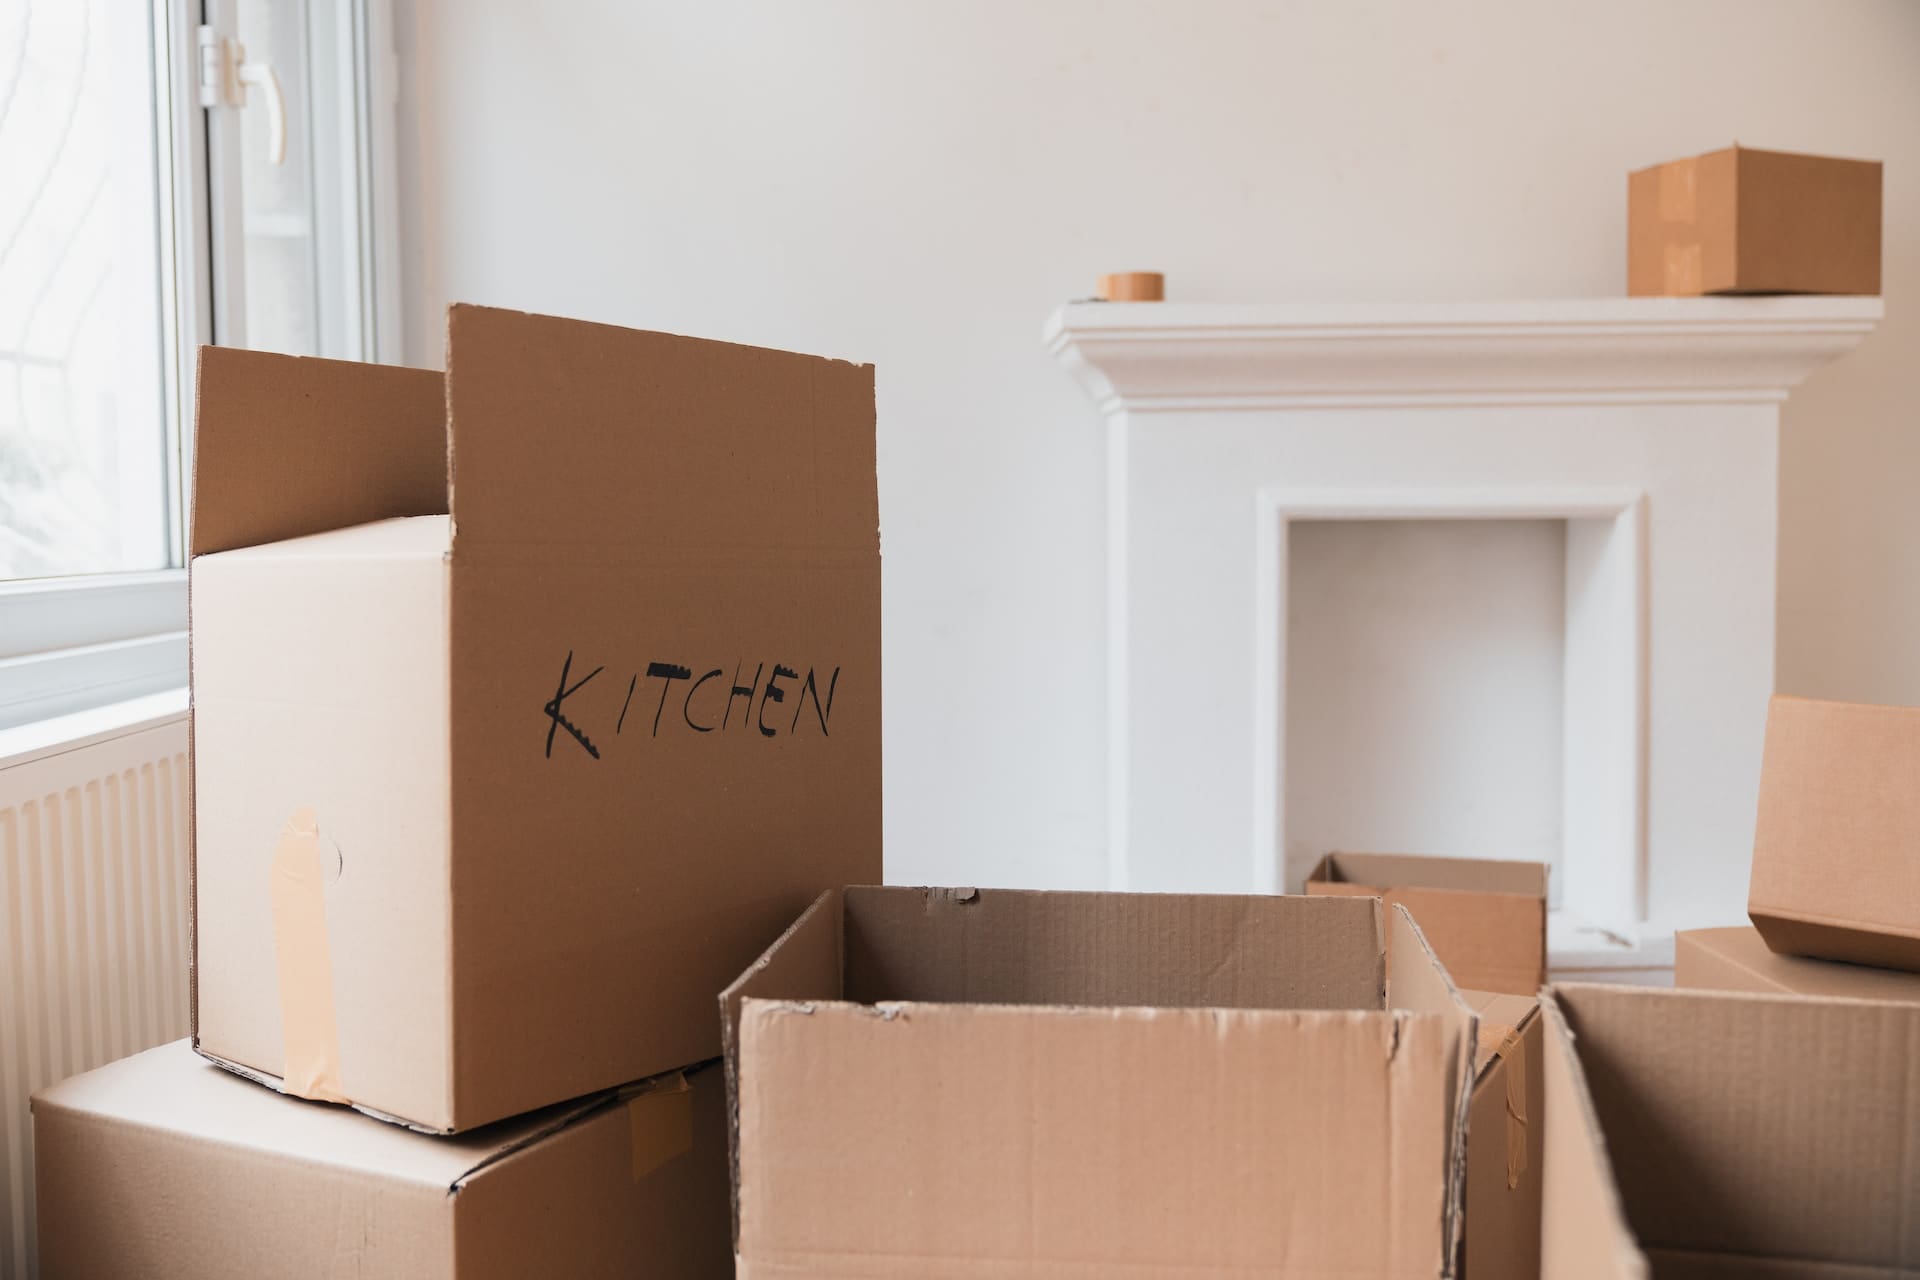 Need a Clean Move-Out: Hire a Professional Cleaning Service